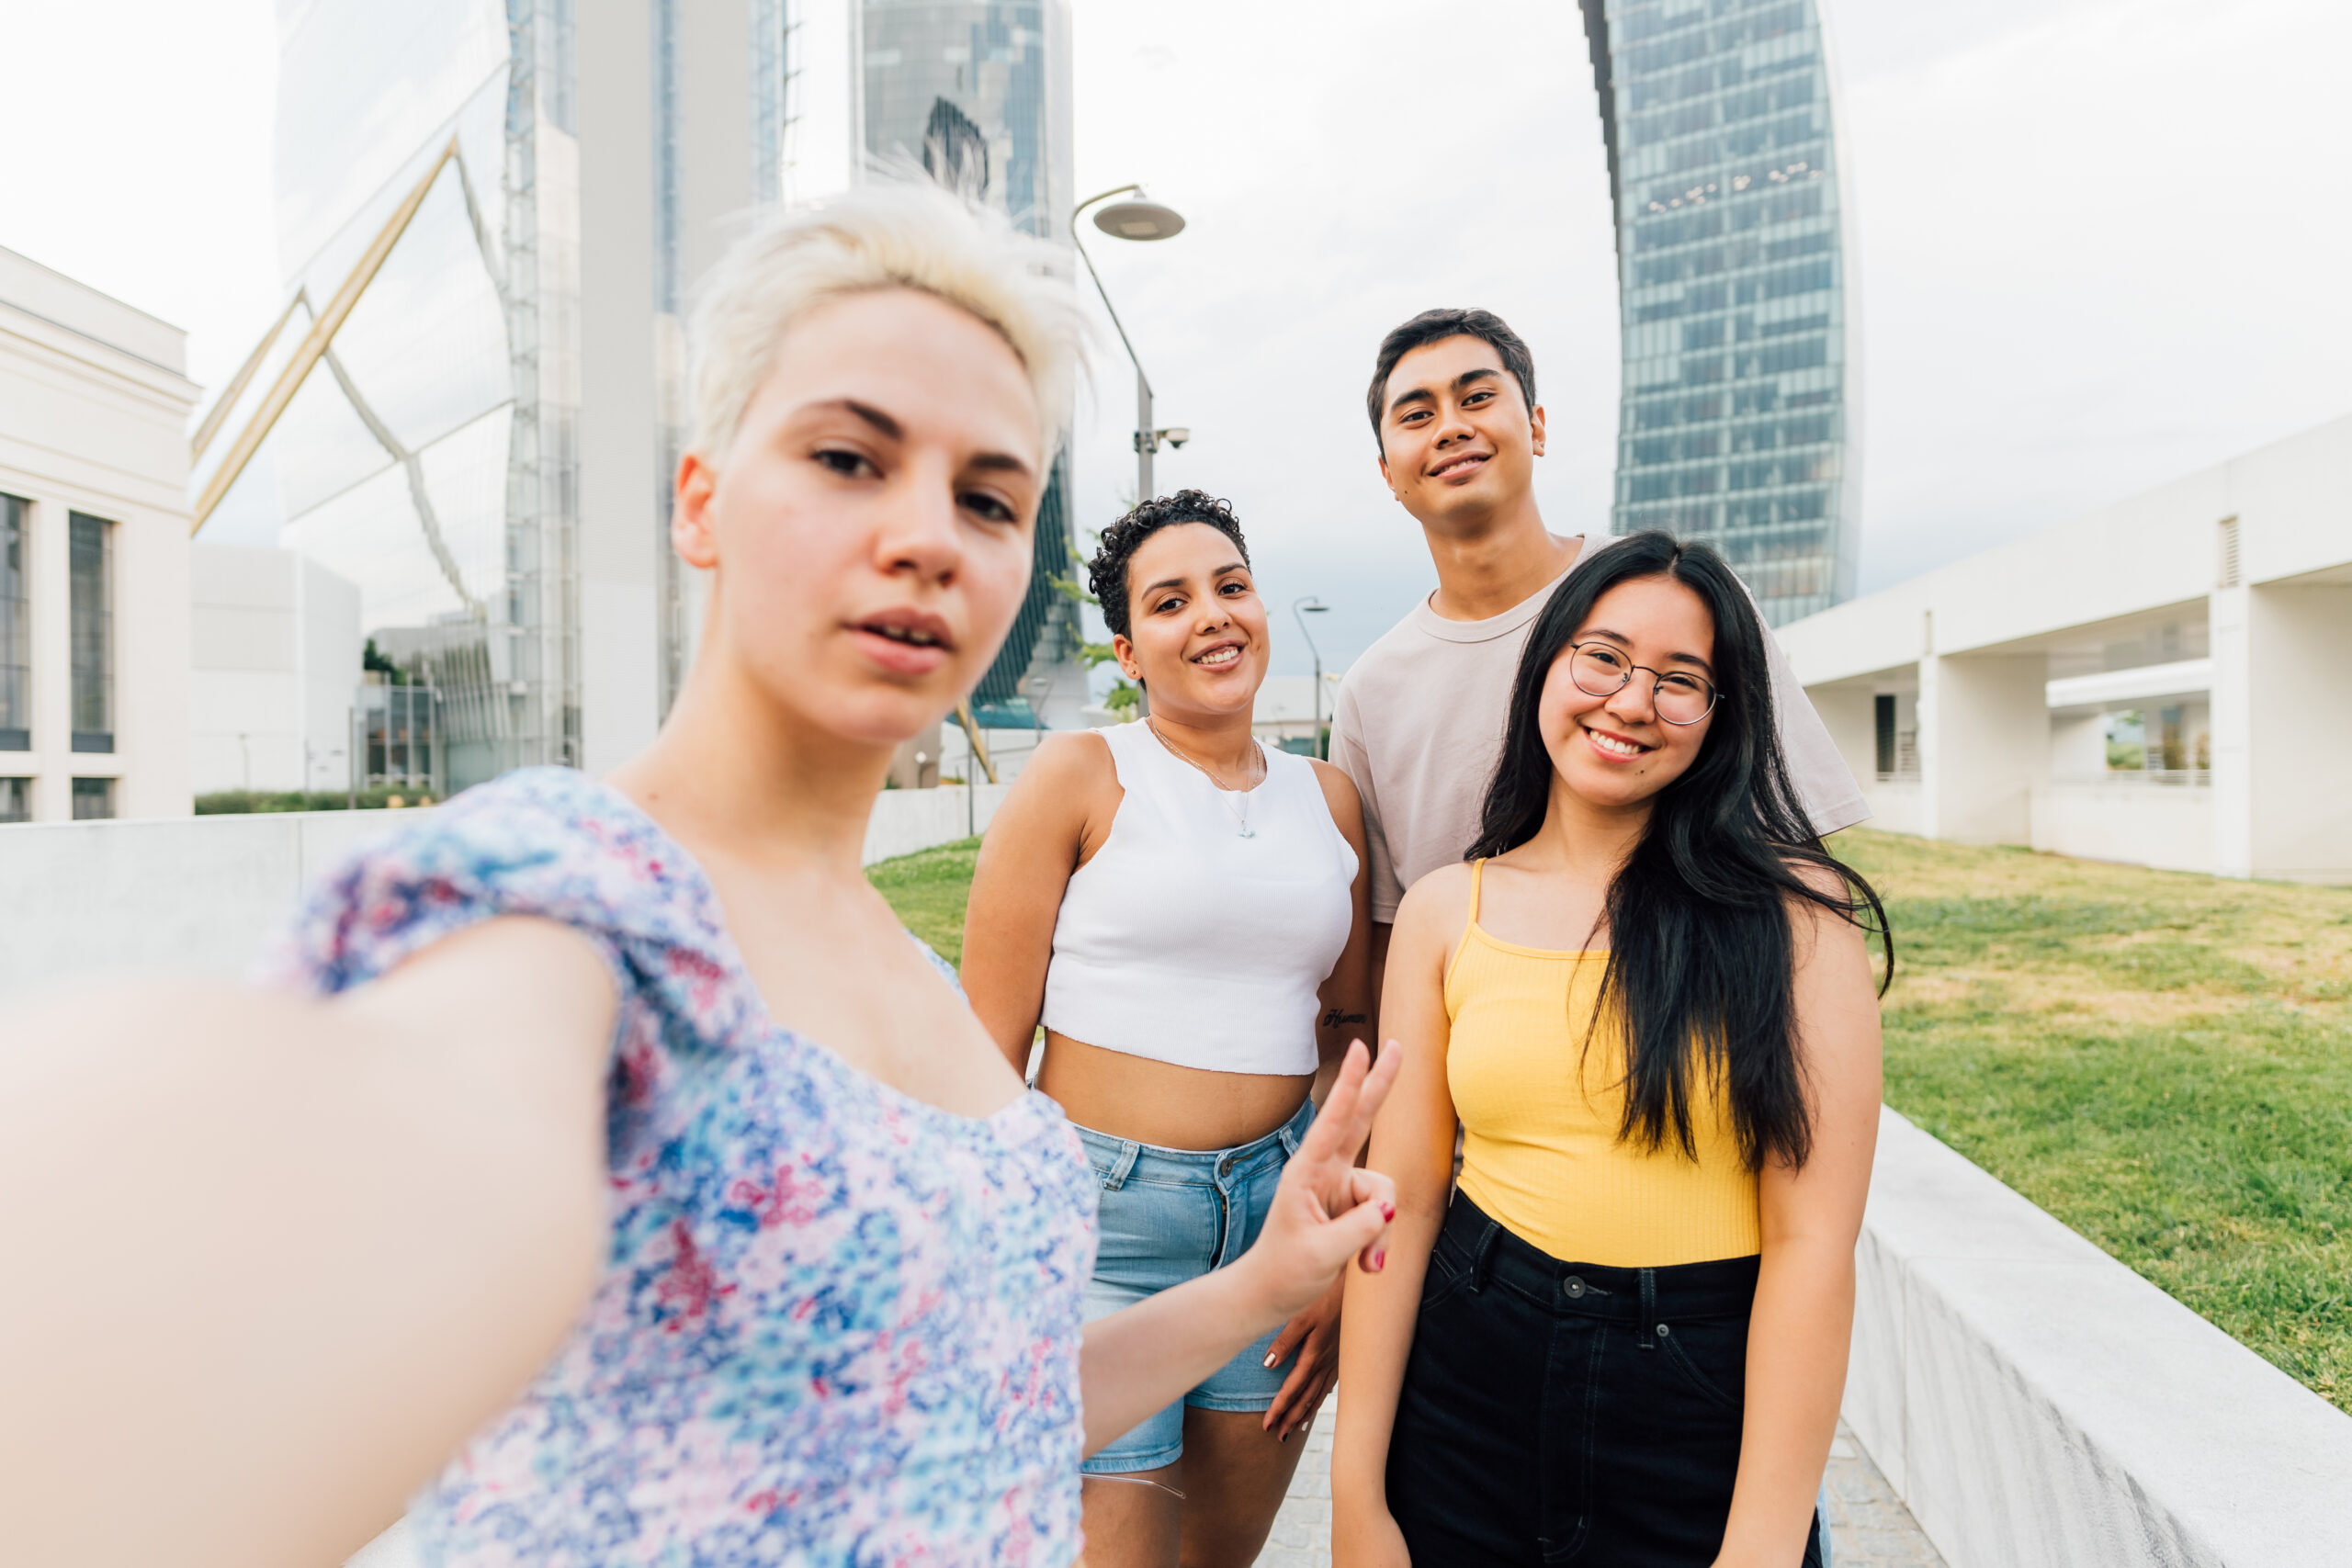 Group of multiethnic young friends outdoor taking selfie smiling